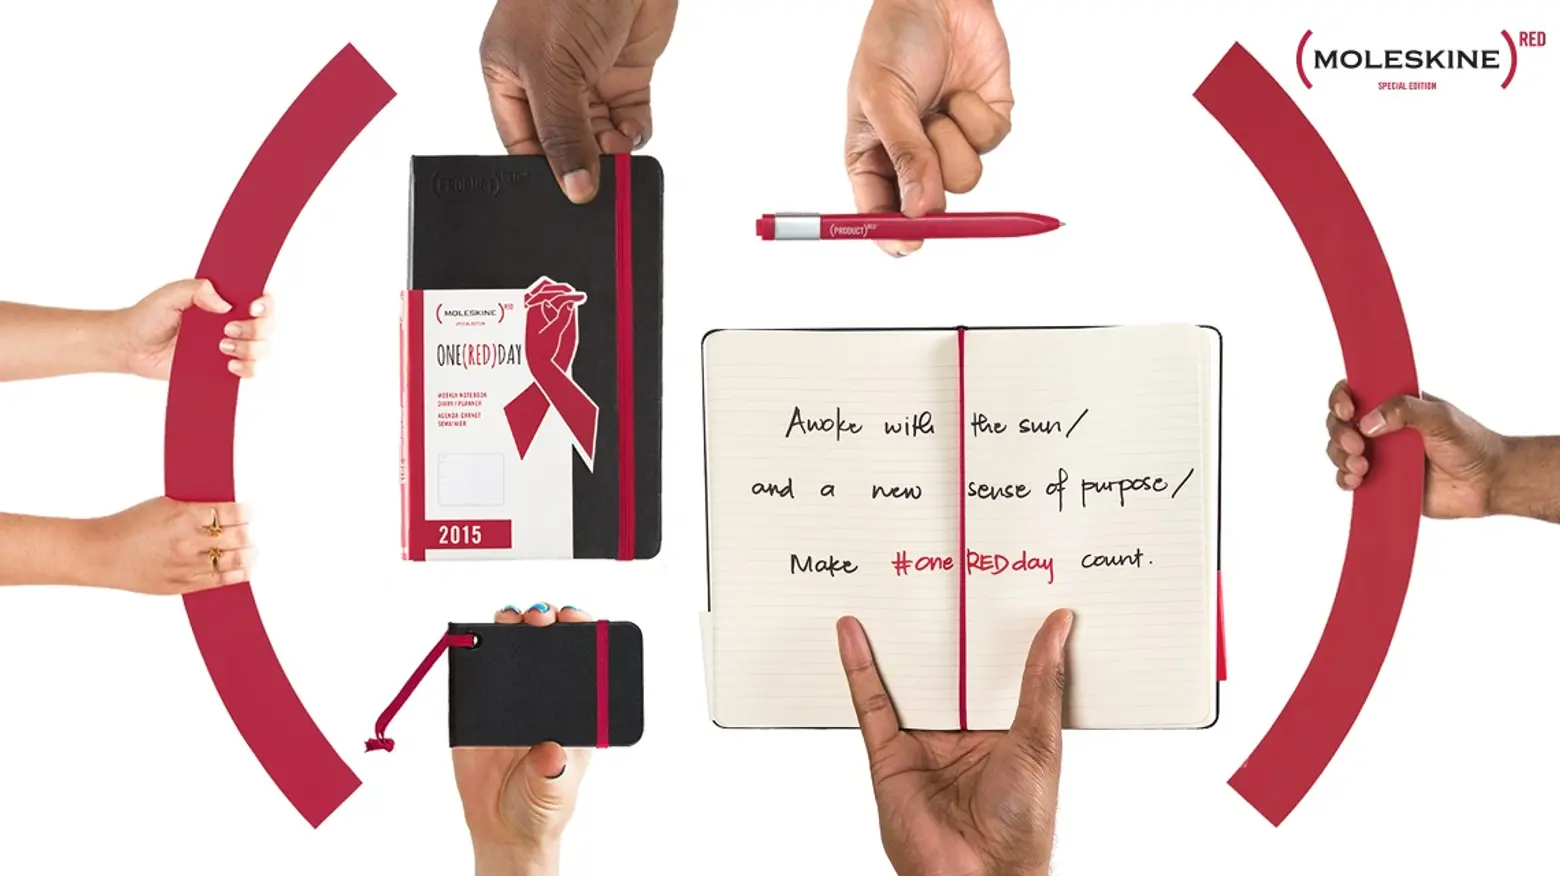 The Iconic Black Moleskine Notebook Is Turning Red to Raise Awareness for AIDS